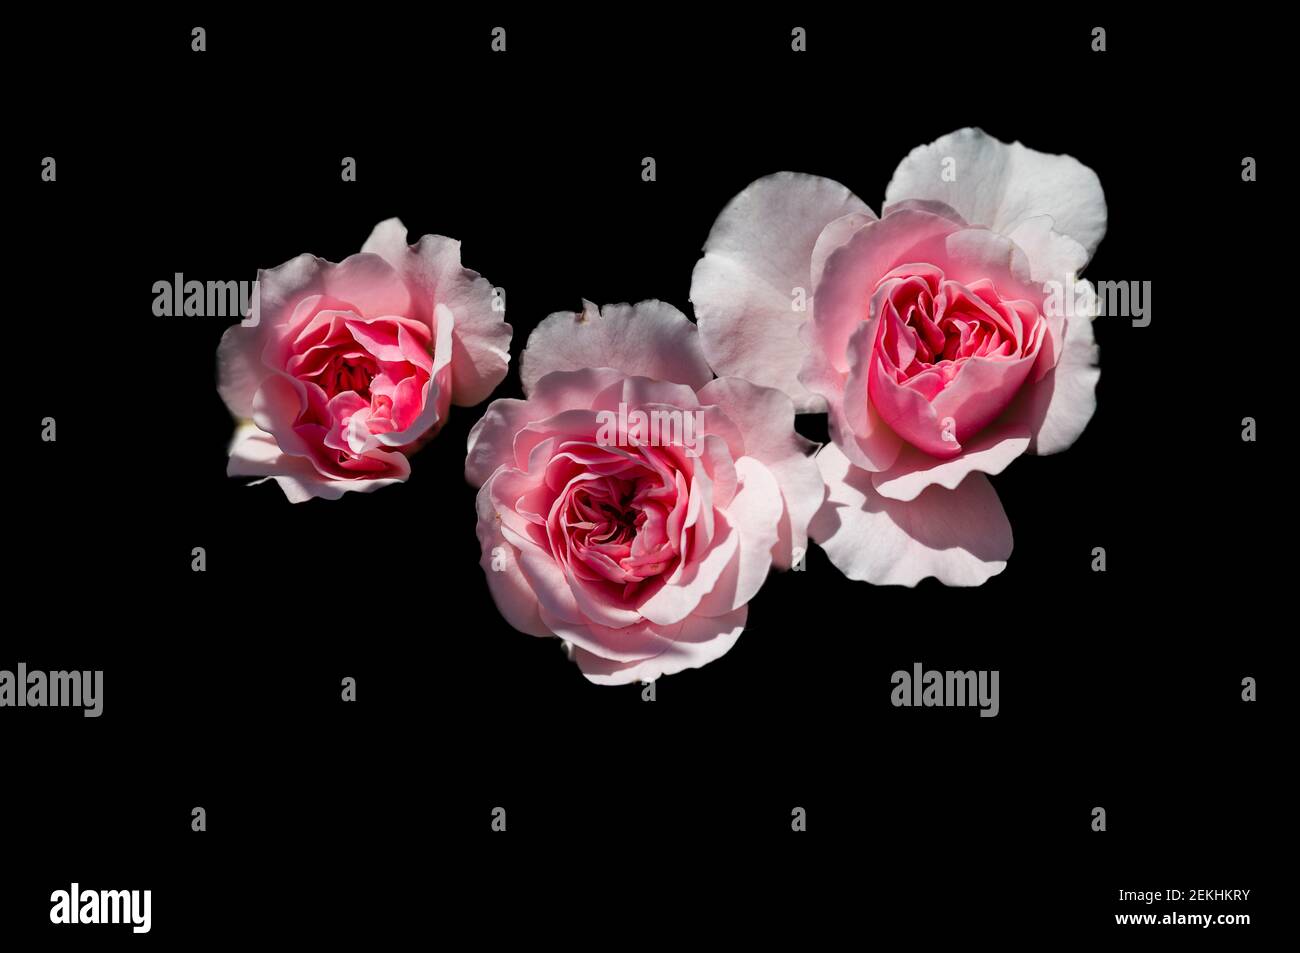 White and pink roses against black background Stock Photo